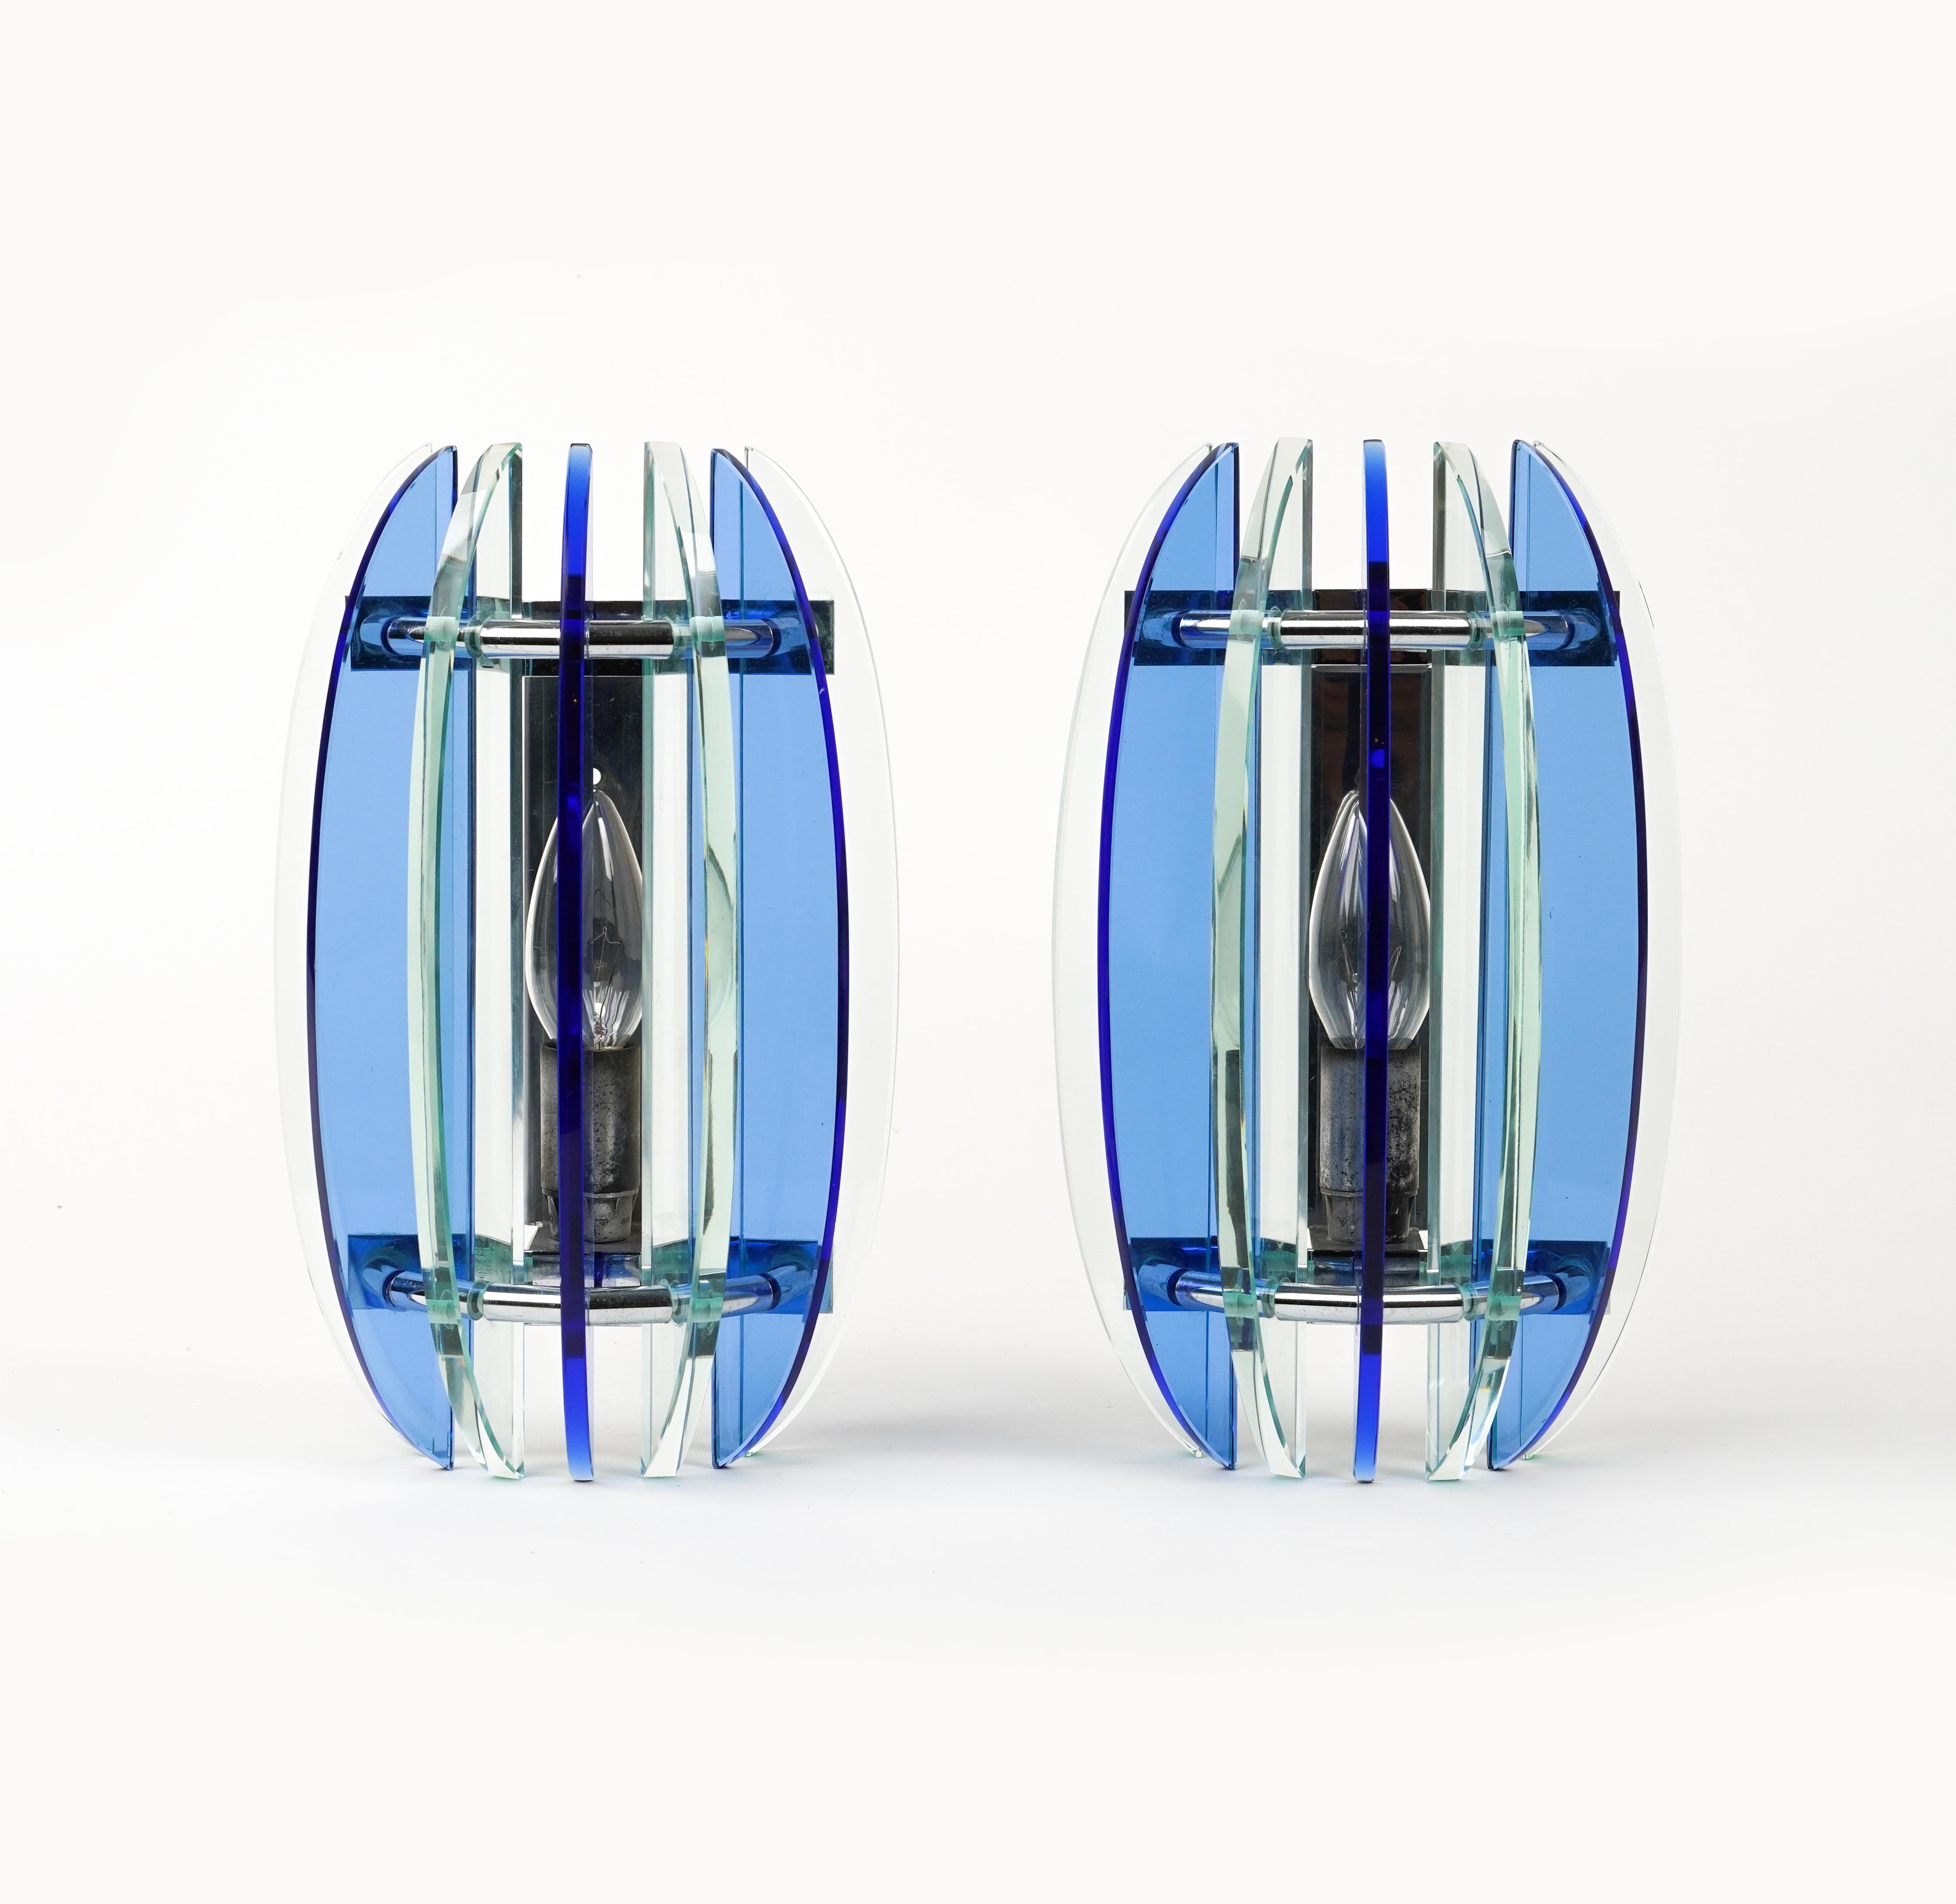 Midcentury Pair of Wall Sconces in Colored Glass & Chrome by Veca, Italy, 1970s For Sale 3